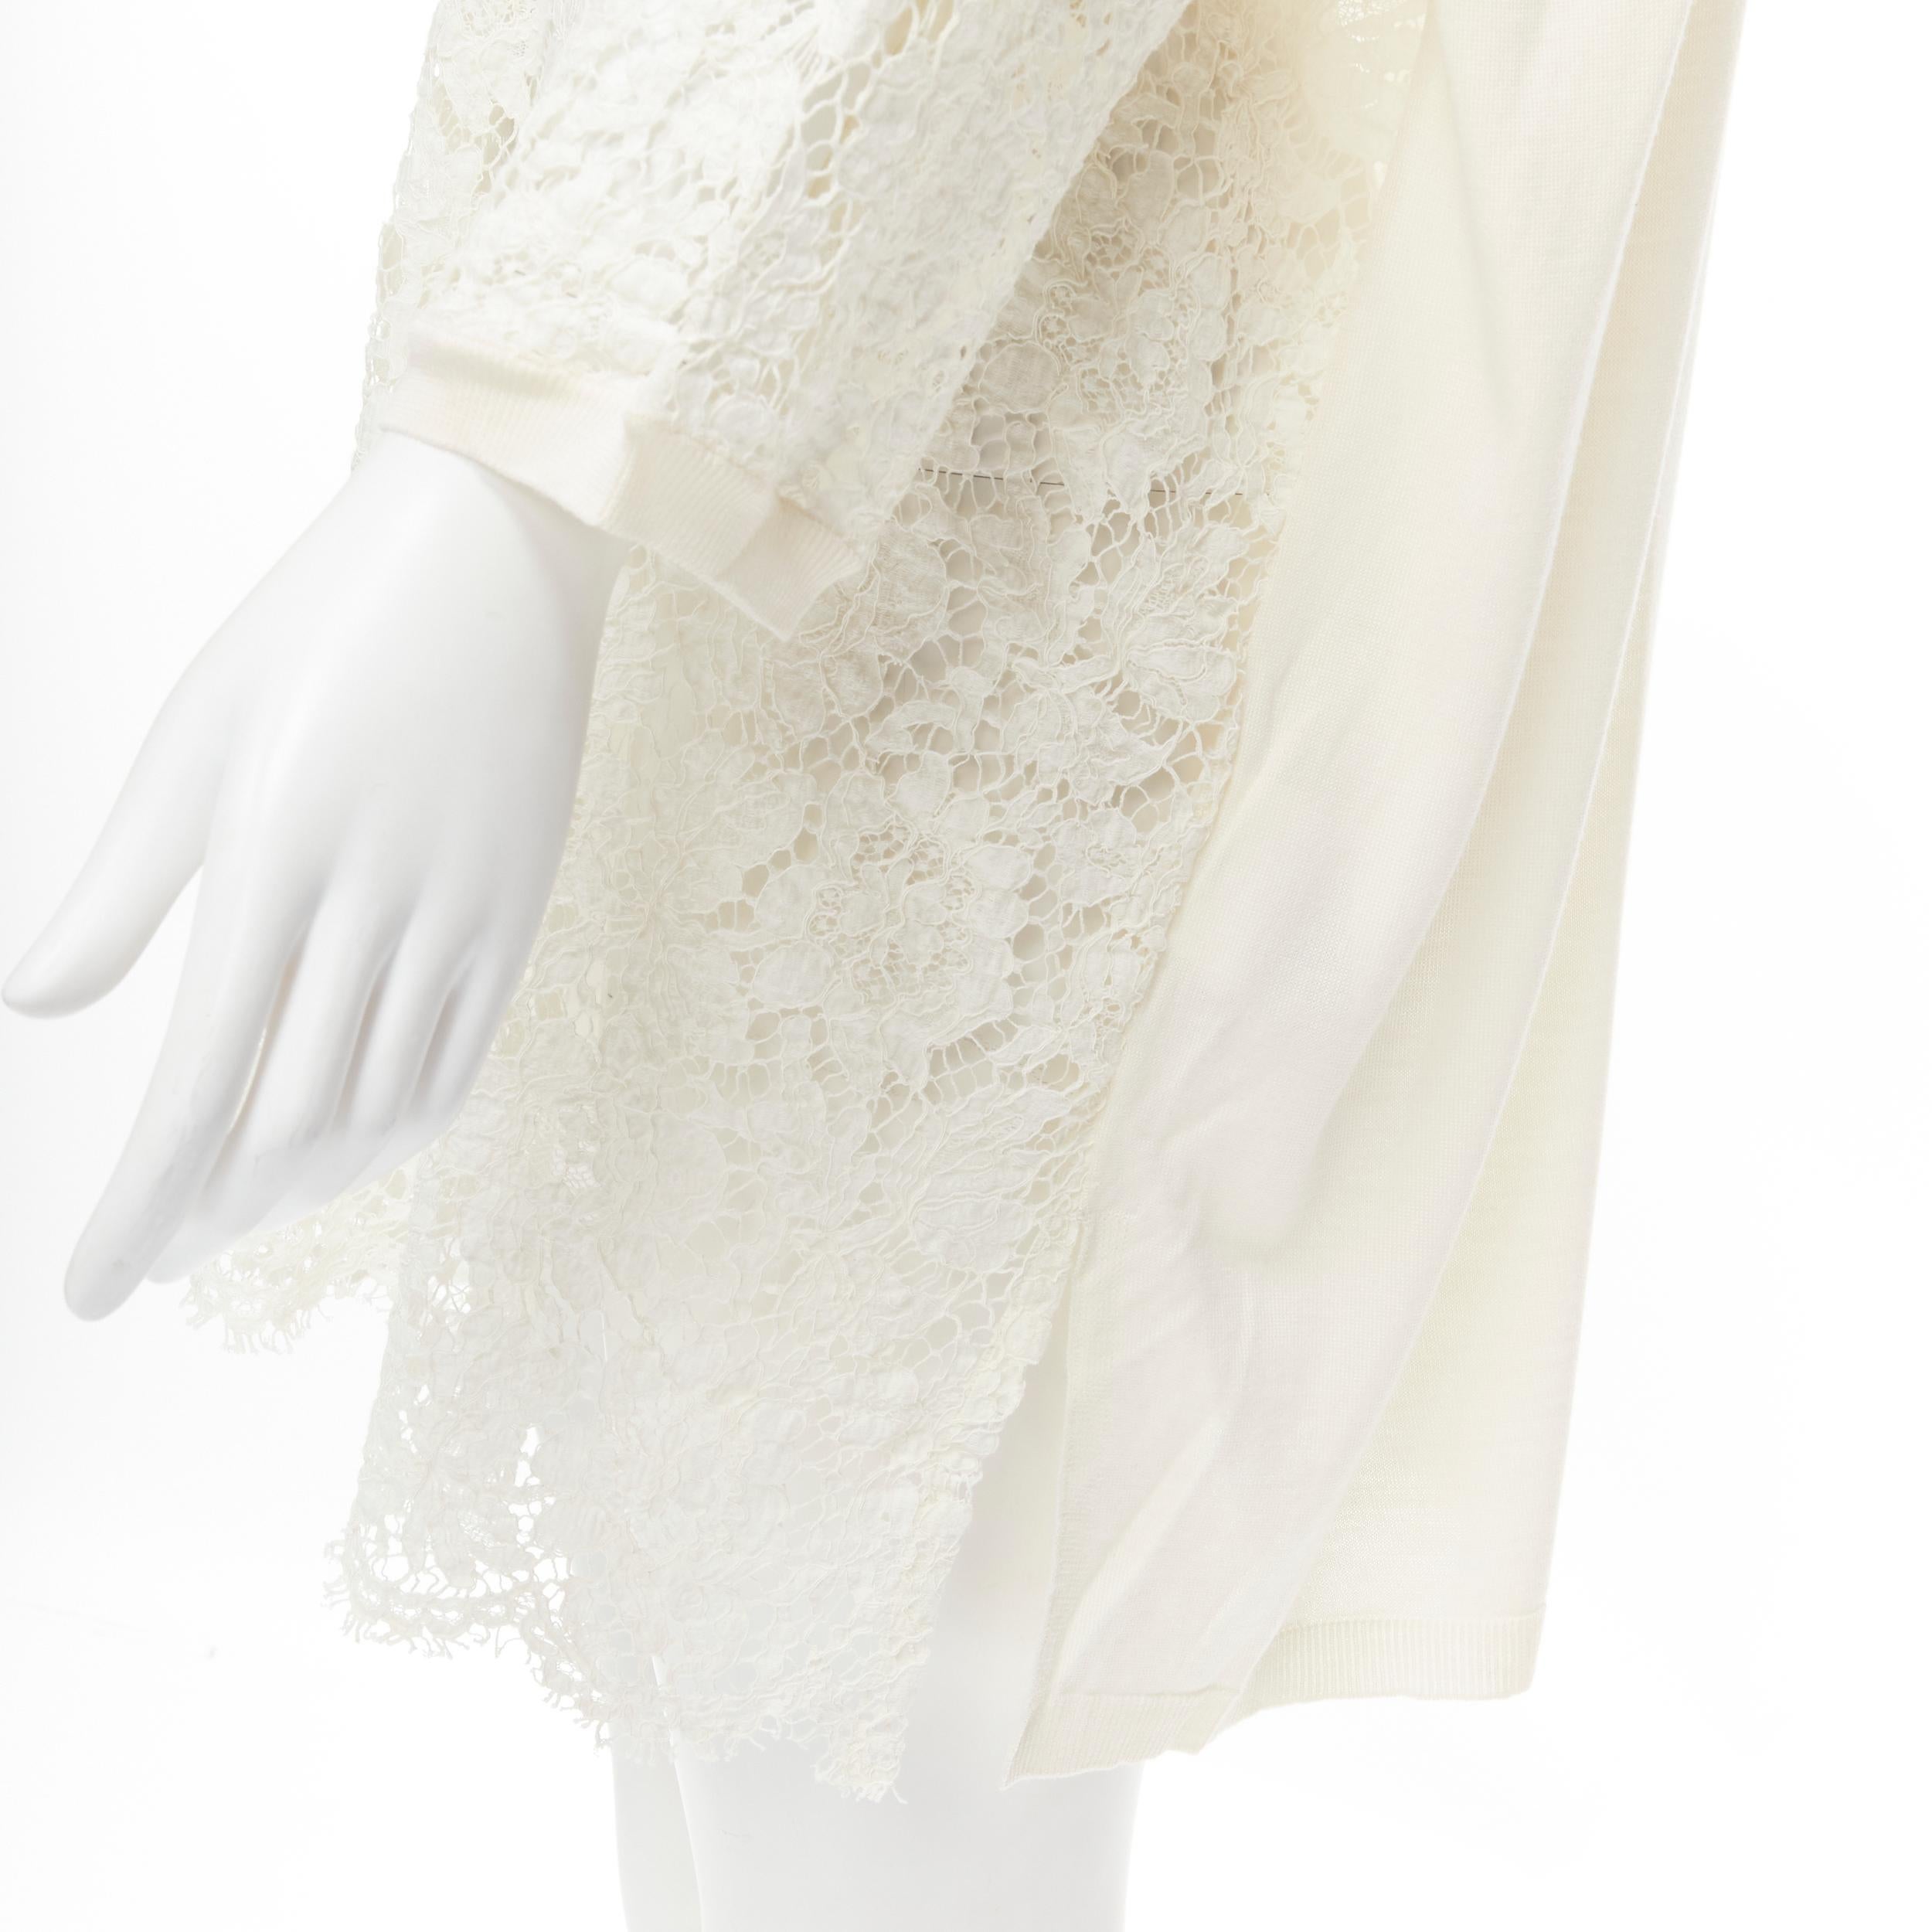 VALENTINO cream floral lace front wool silk cashmere knit back casual dress M 
Reference: MELK/A00093 
Brand: Valentino 
Material: Wool 
Color: Beige 
Pattern: Solid 
Made in: Italy 

CONDITION: 
Condition: Good, this item was pre-owned and is in